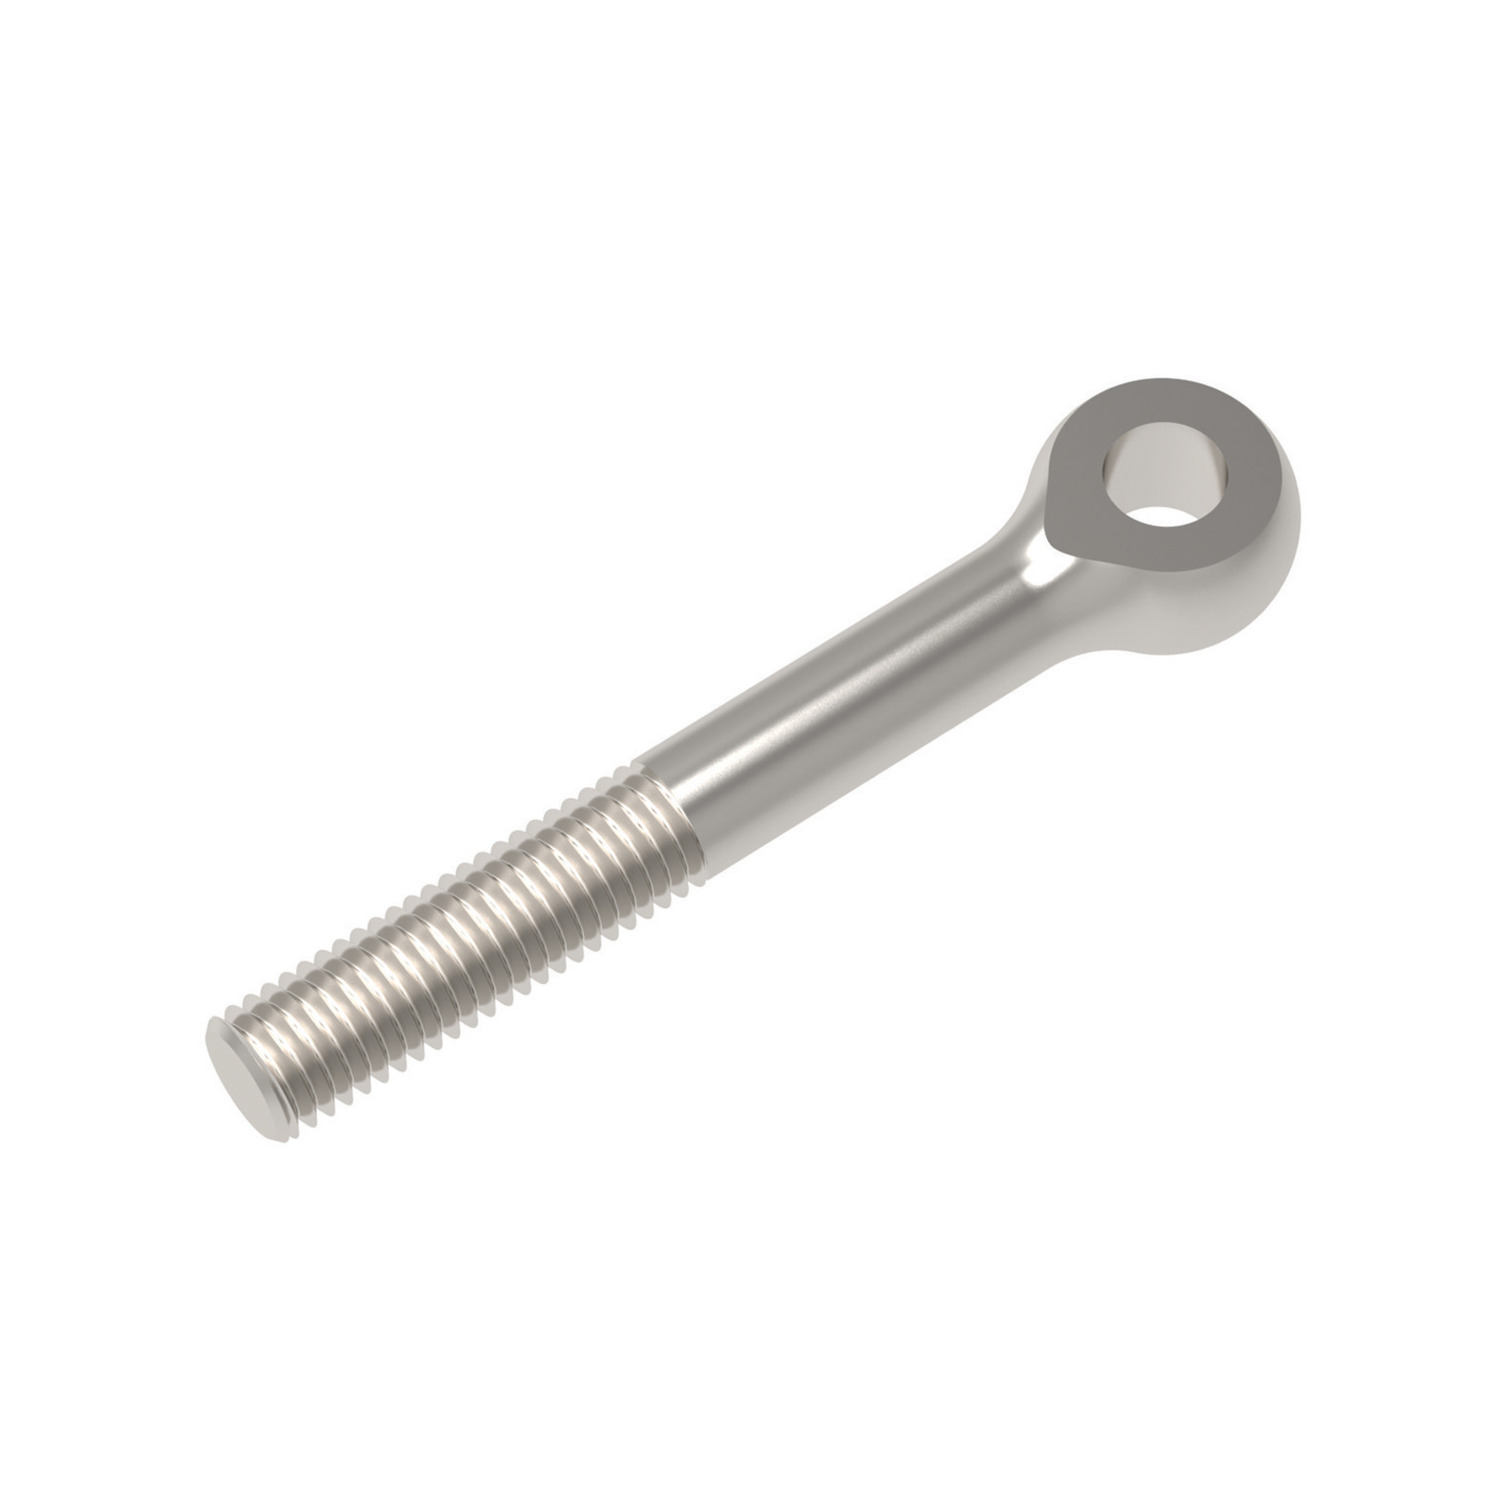 Product 18832, Stainless Swing Bolts standard tolerance / 